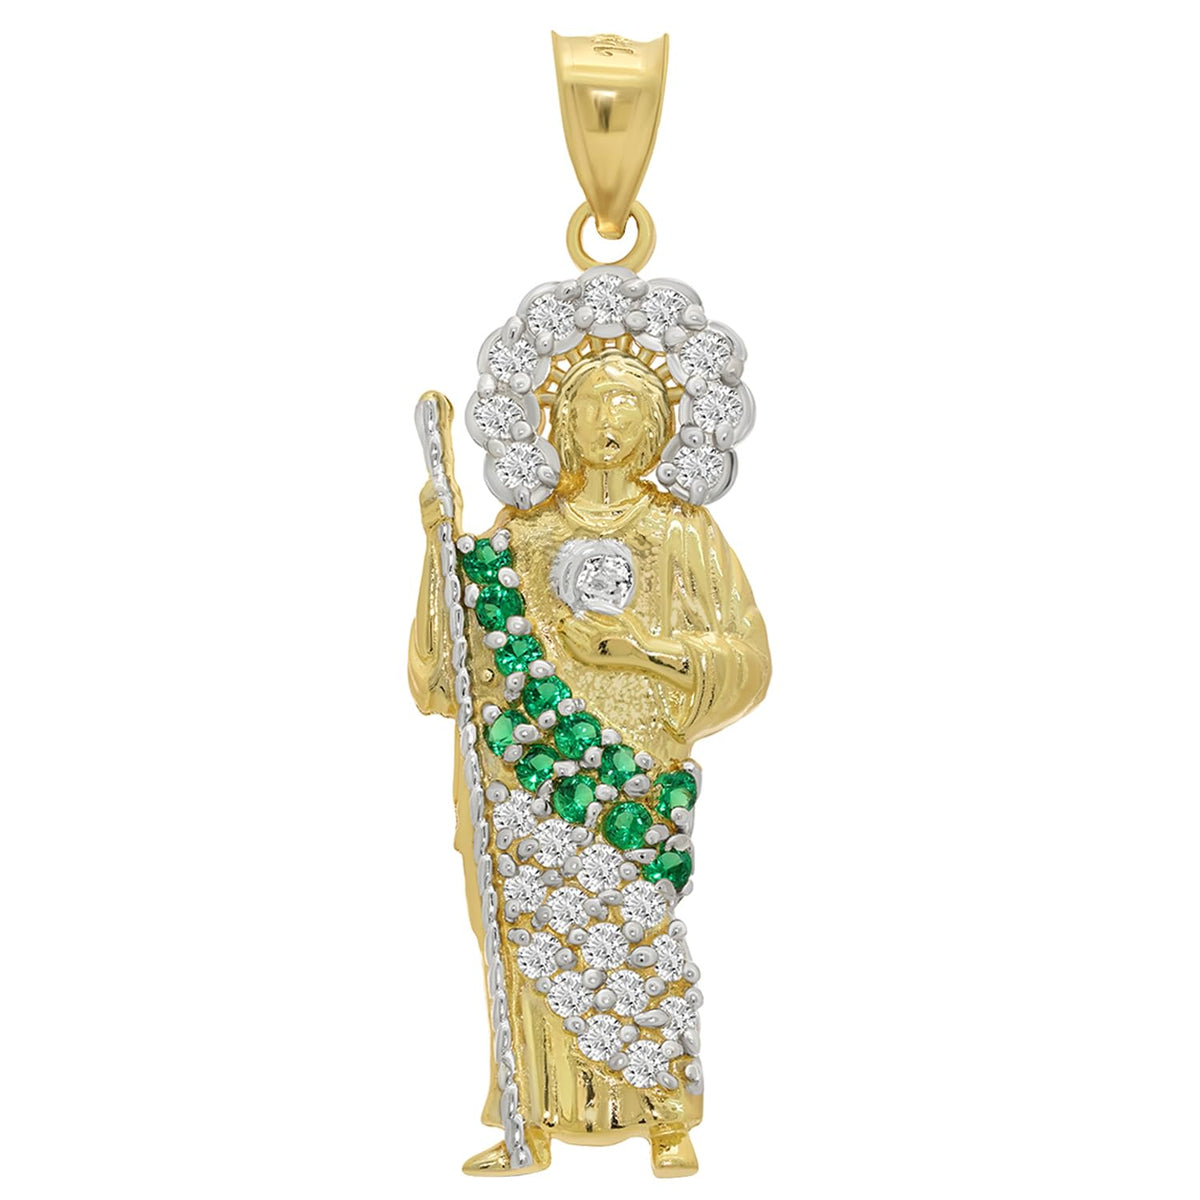 14k Yellow Gold Gold Saint Jude Pendant with Green and White Cubic Zirconia - 3 Sizes